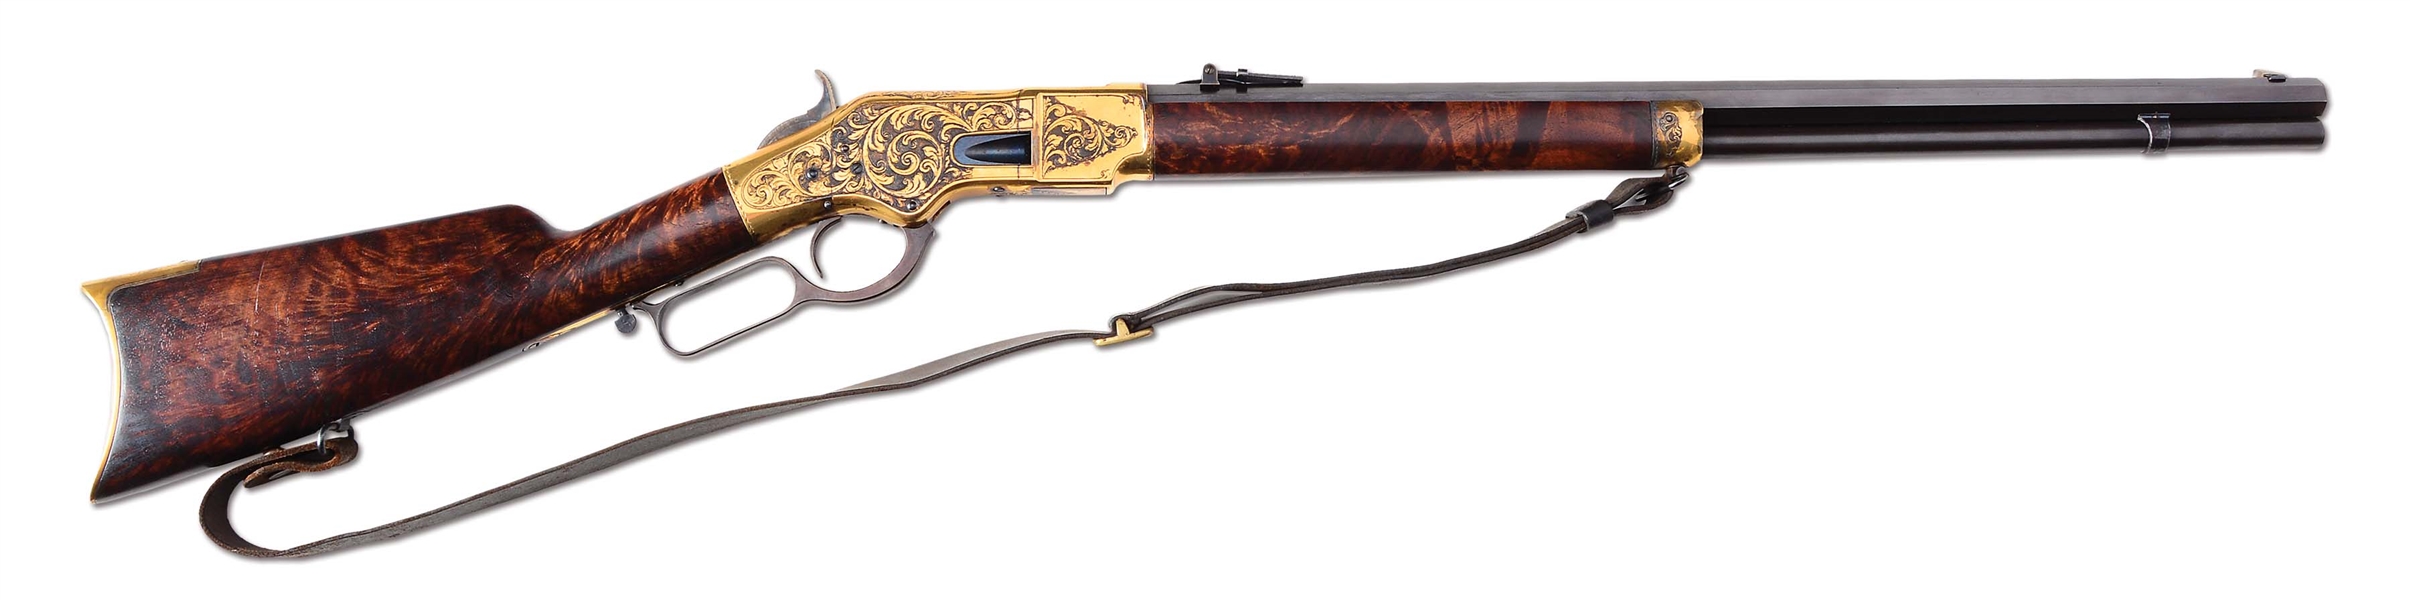 (A) INCREDIBLY RARE J. ULRICH SIGNED, ENGRAVED & GOLD PLATED WINCHESTER MODEL 1866 LEVER ACTION RIFLE WITH FACTORY LETTER.